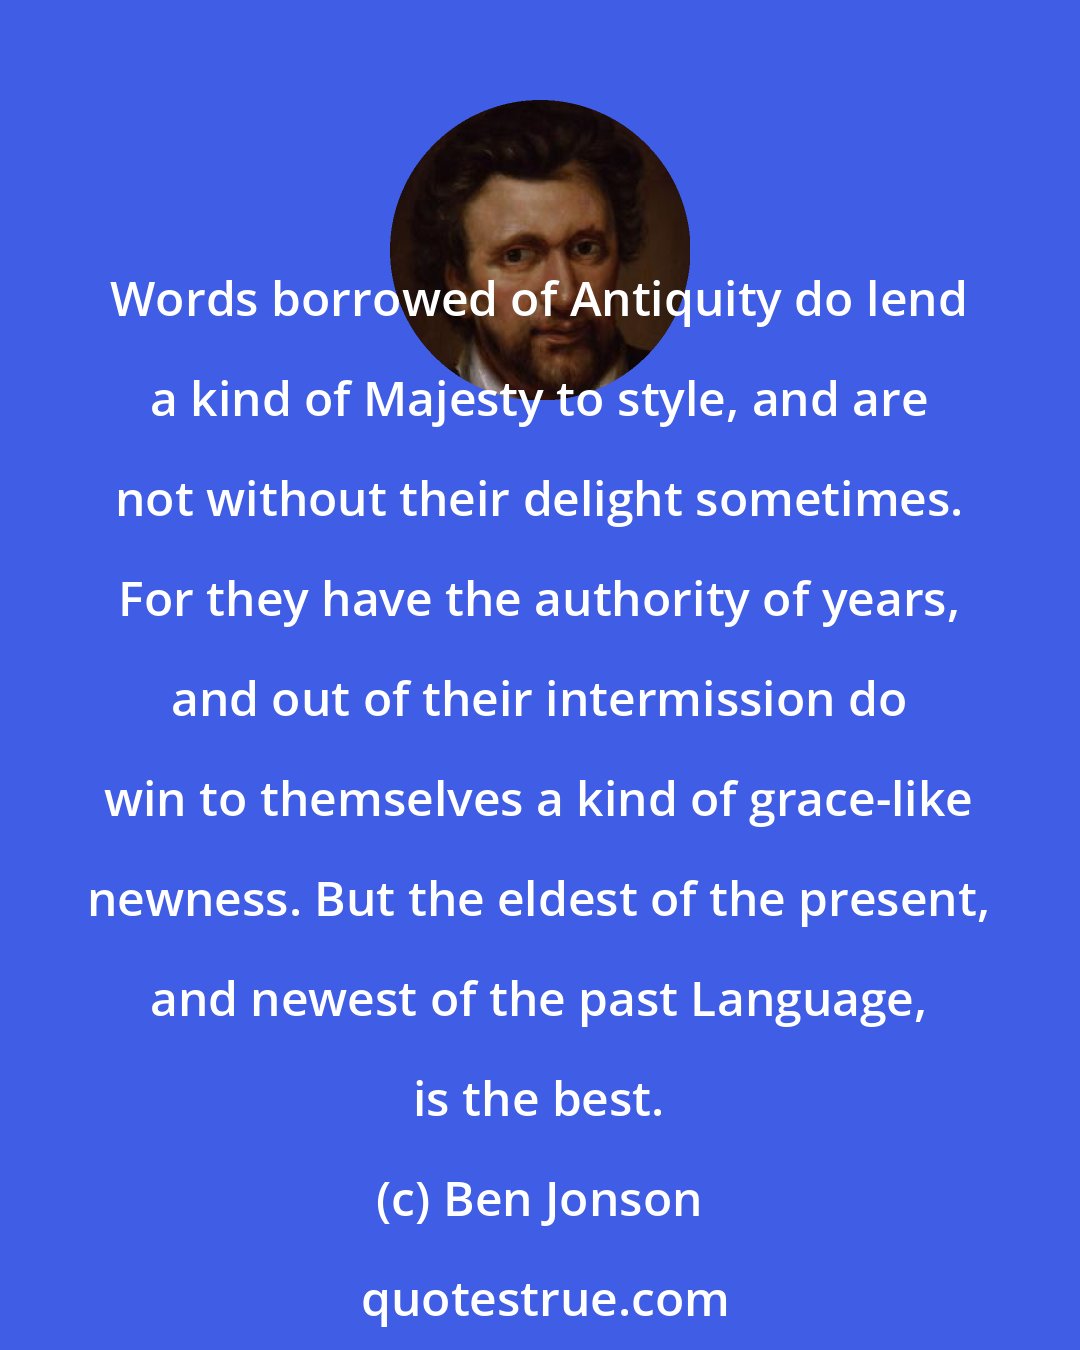 Ben Jonson: Words borrowed of Antiquity do lend a kind of Majesty to style, and are not without their delight sometimes. For they have the authority of years, and out of their intermission do win to themselves a kind of grace-like newness. But the eldest of the present, and newest of the past Language, is the best.